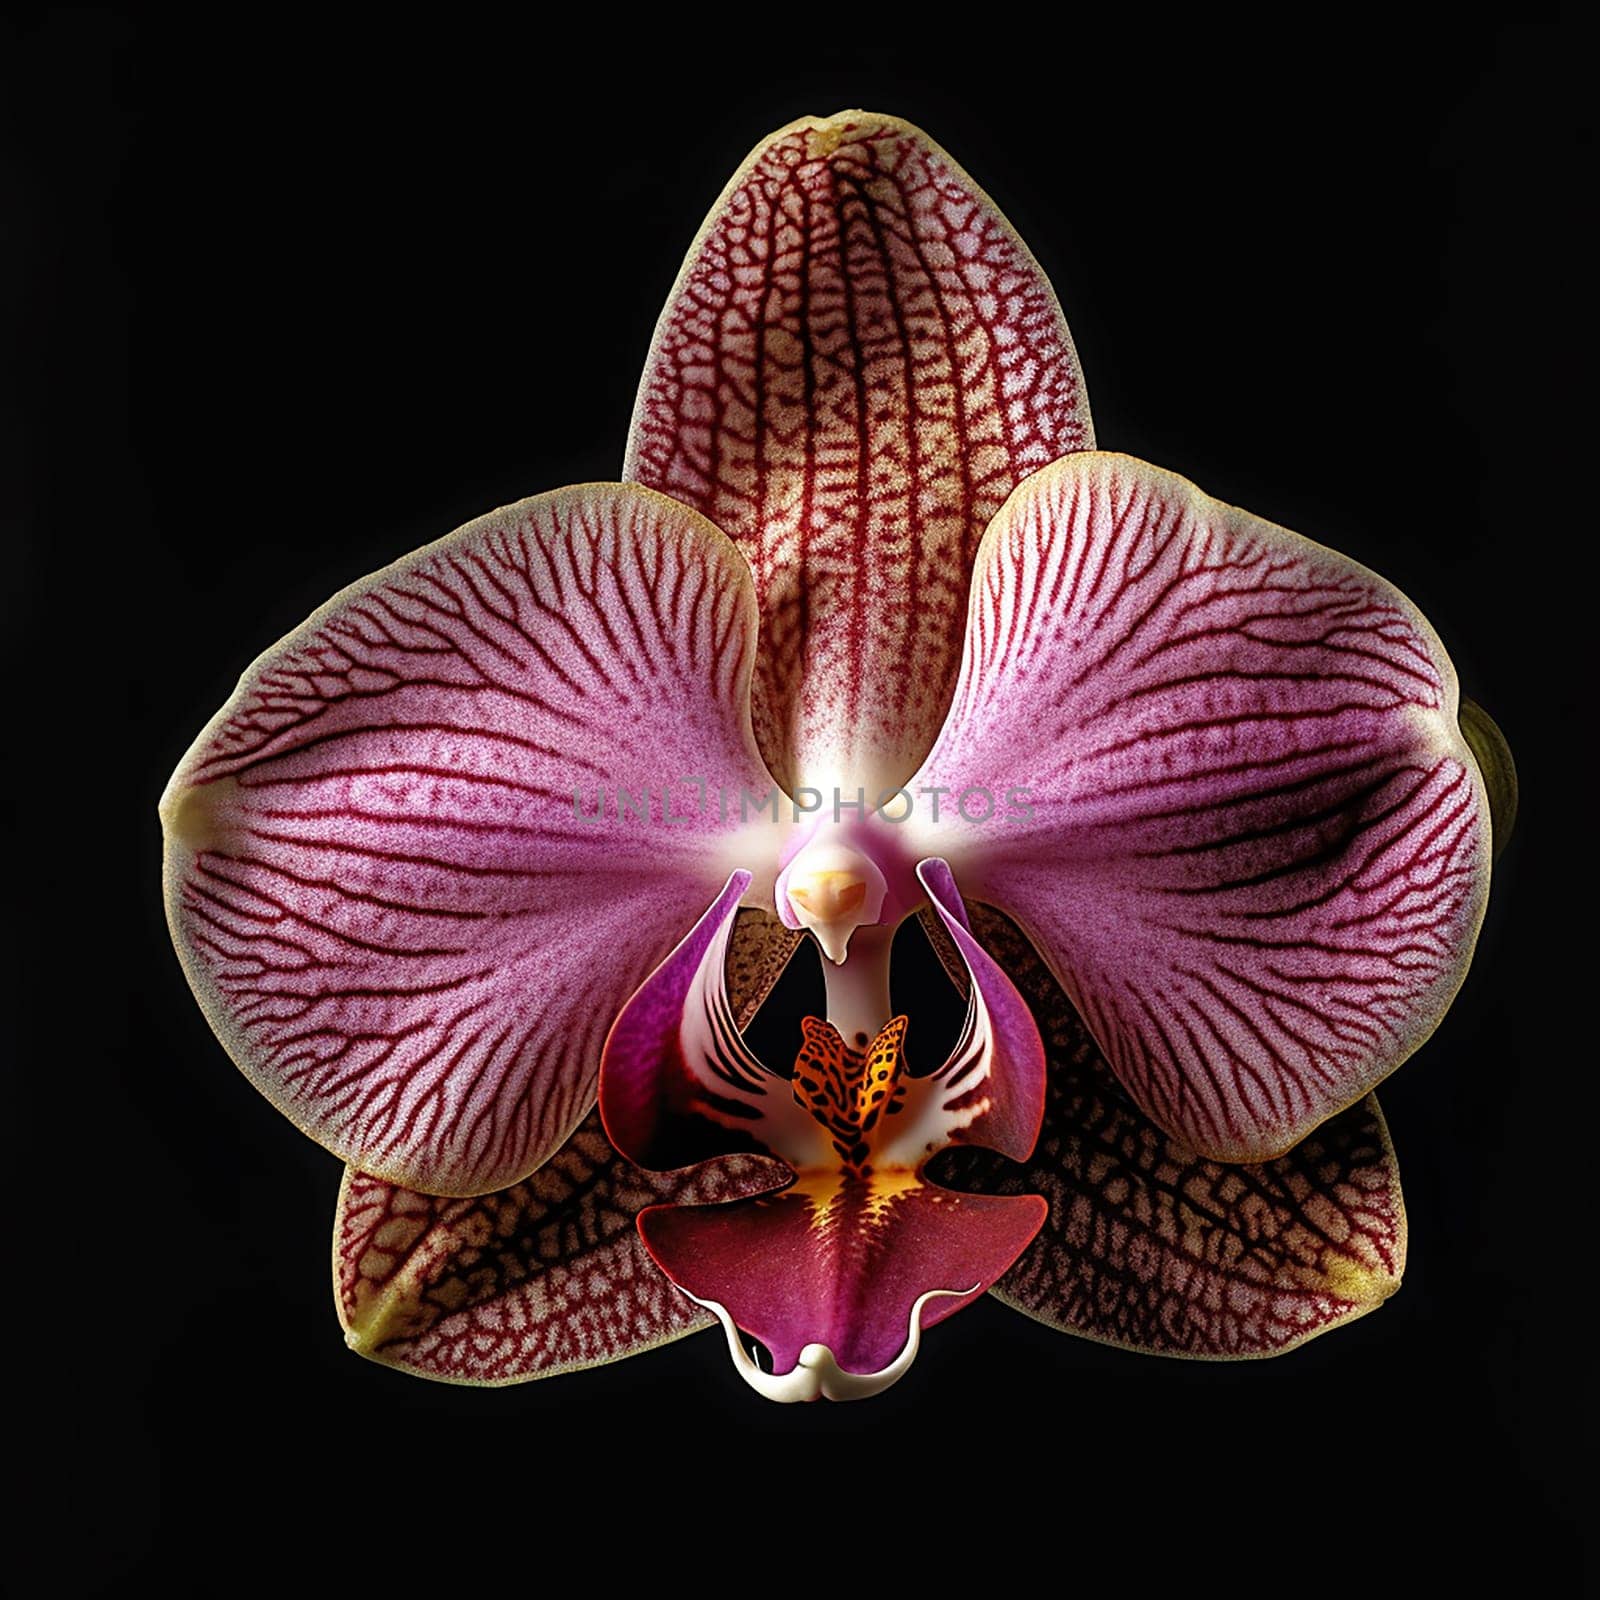 A single orchid with intricate pink and purple patterns on a black background by Hype2art